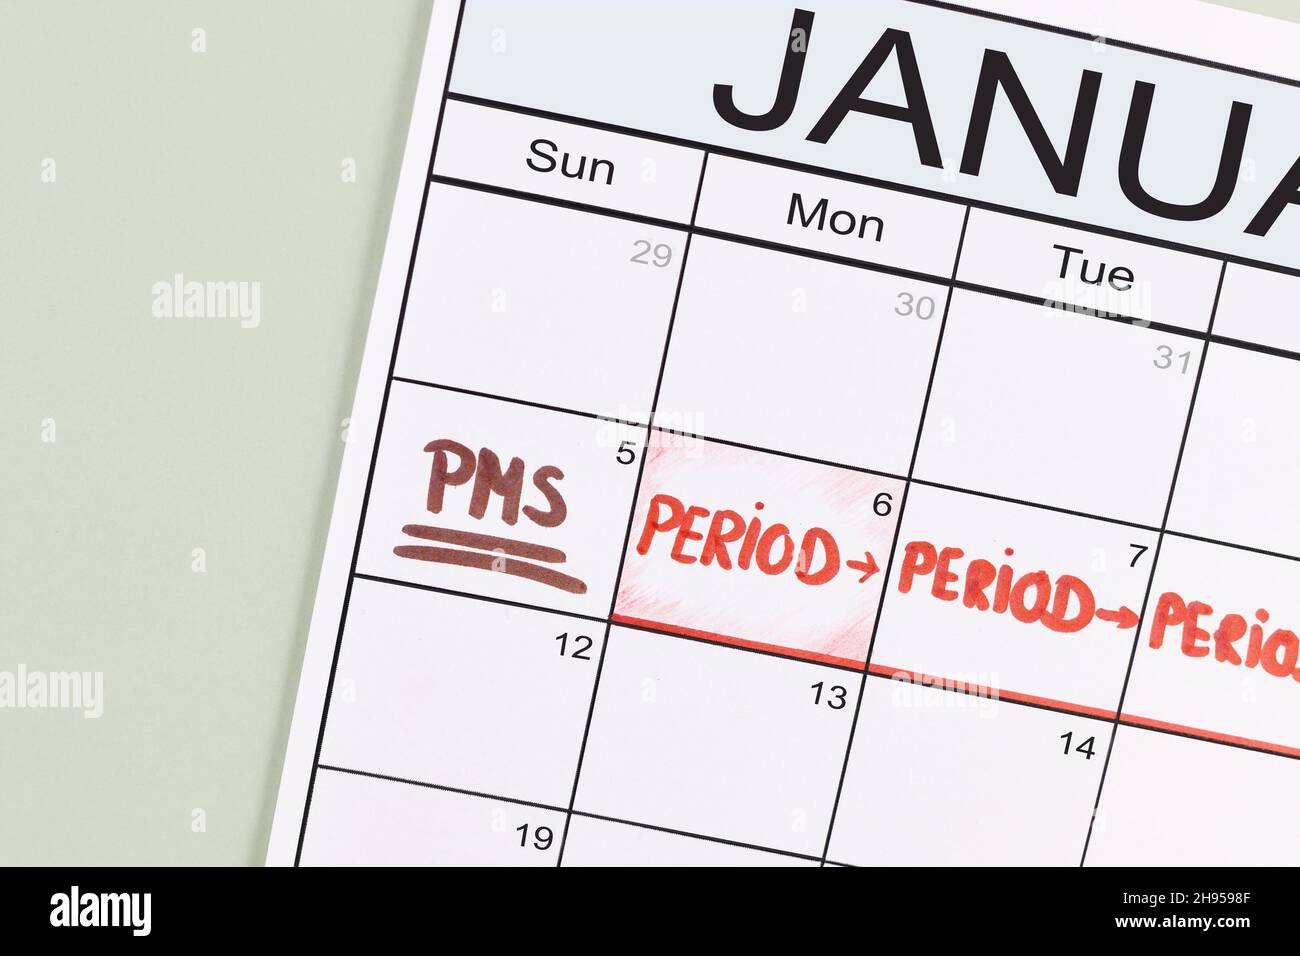 Premenstrual syndrome and female period concept with calendar date with PMS and period marked with red words Stock Photo